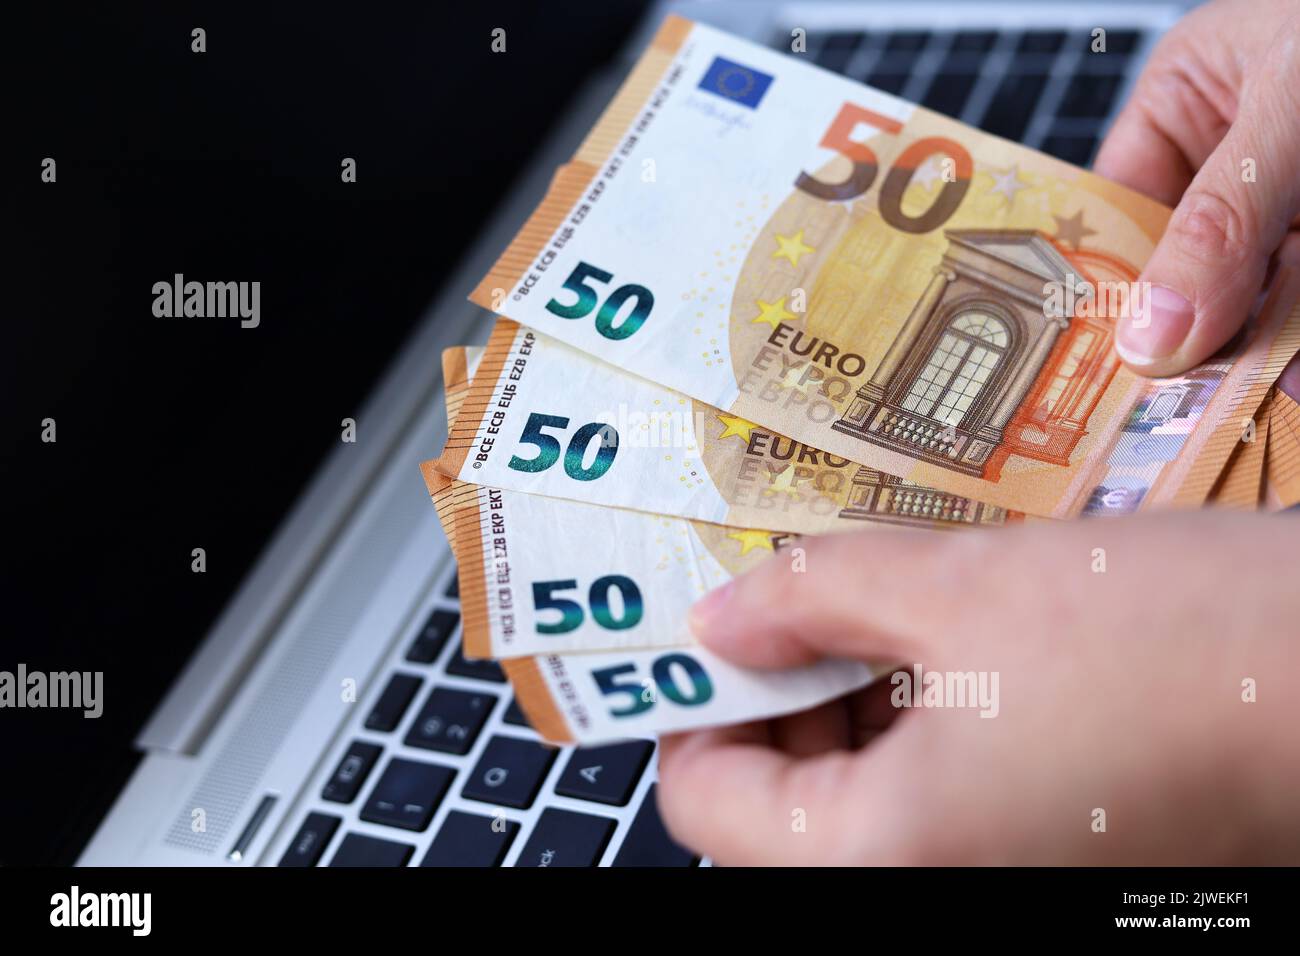 Euro banknotes in female hands on laptop background. Woman counting money, concept of wages or bonus Stock Photo